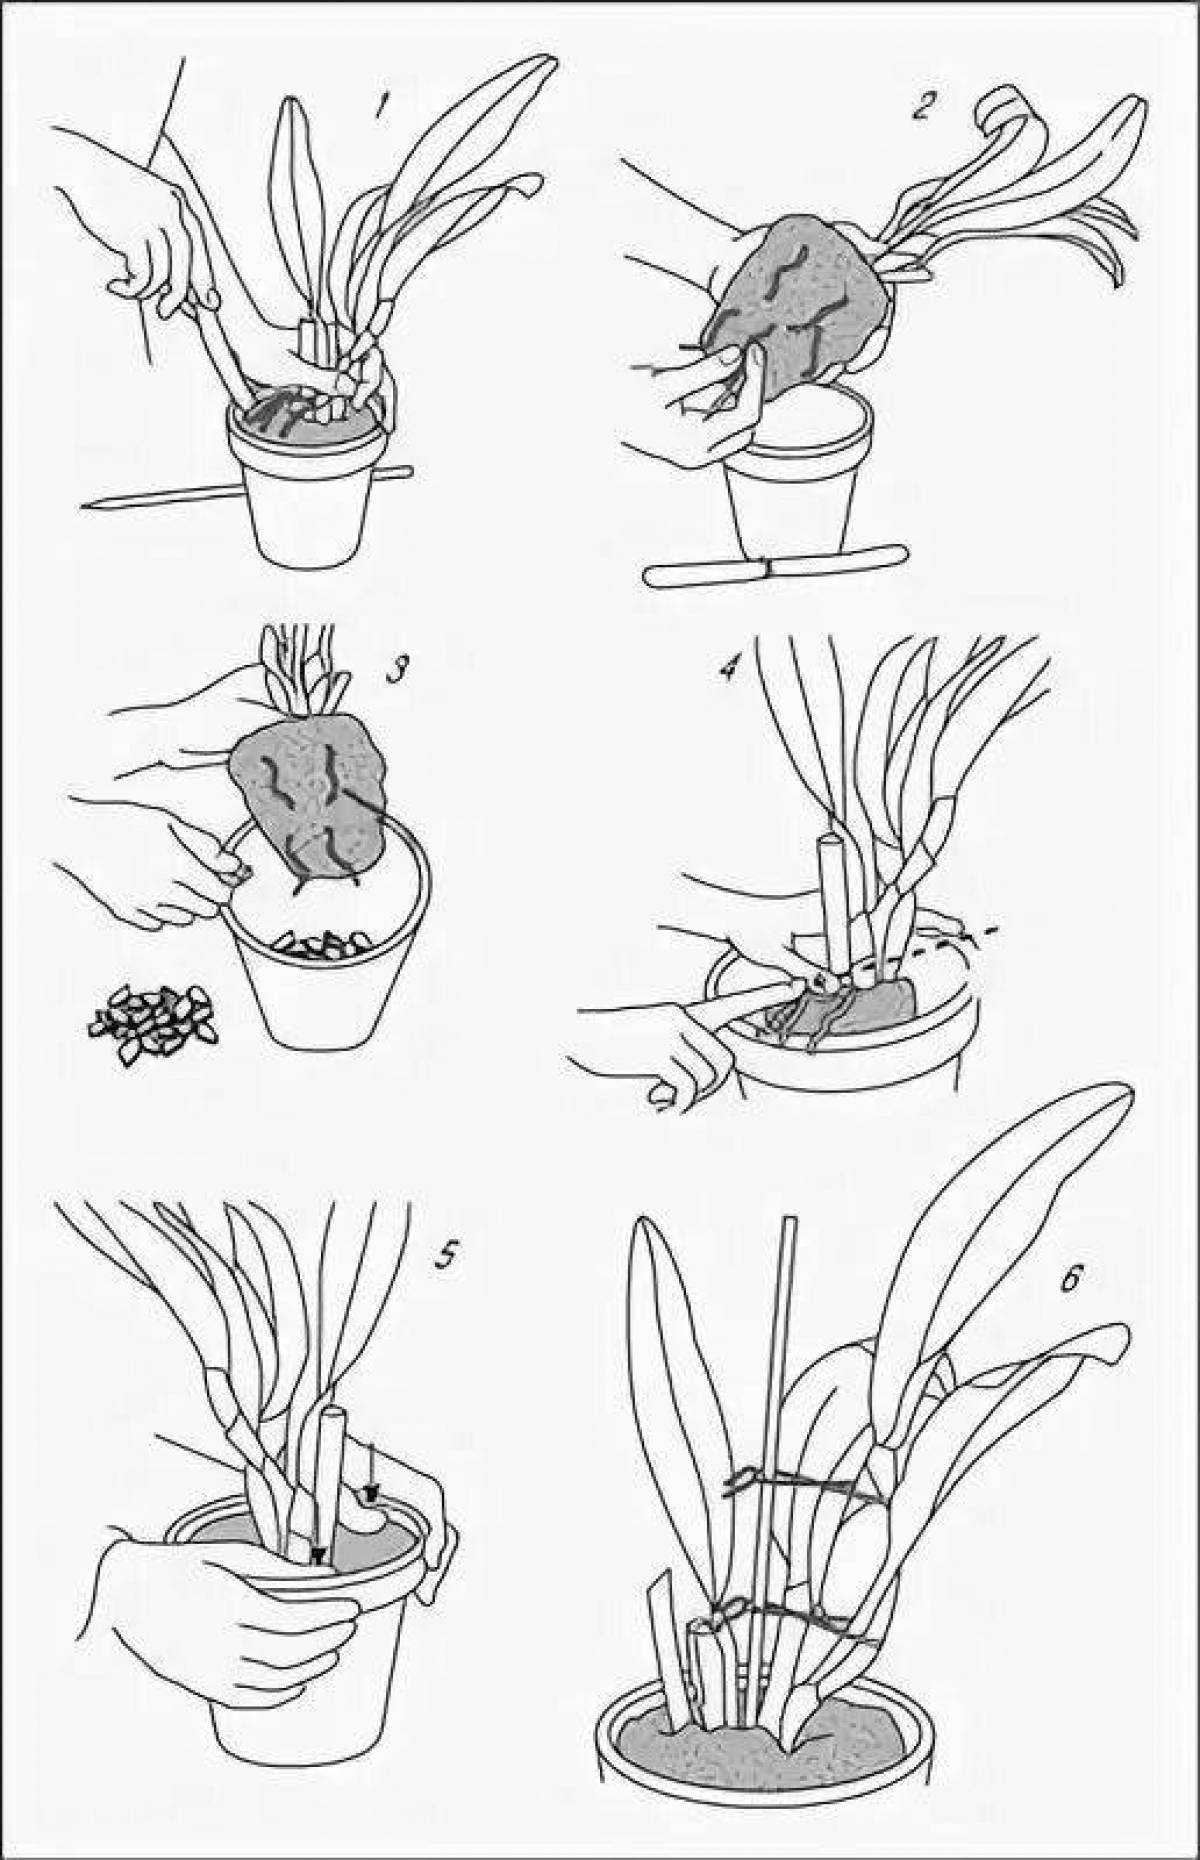 Fun houseplant care coloring page